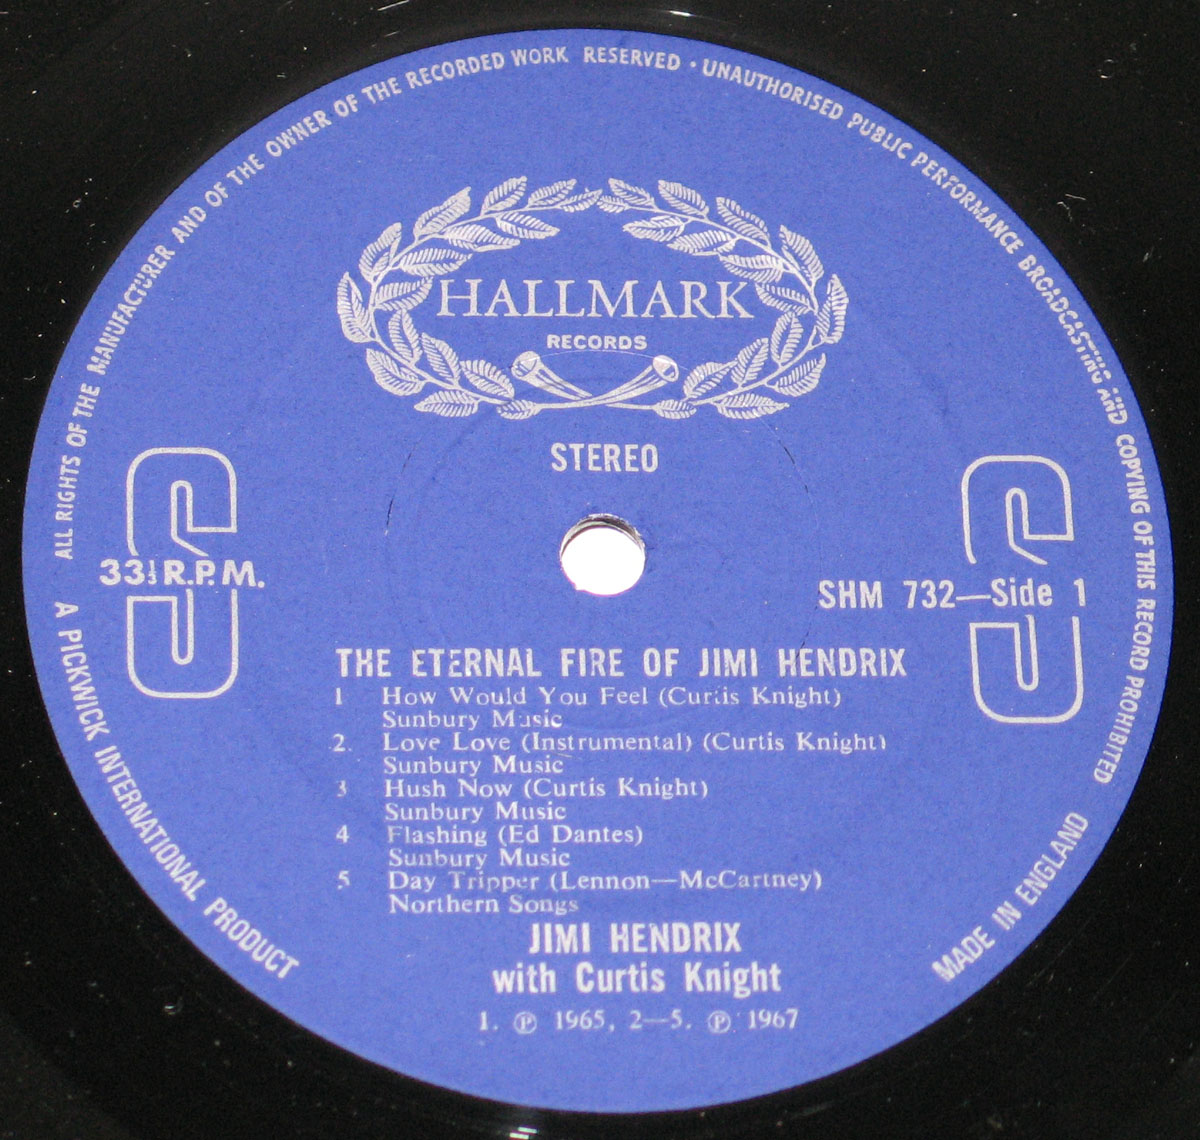 Enlarged High Resolution Photo of the Record's Blue "Hallmark Records" Label   